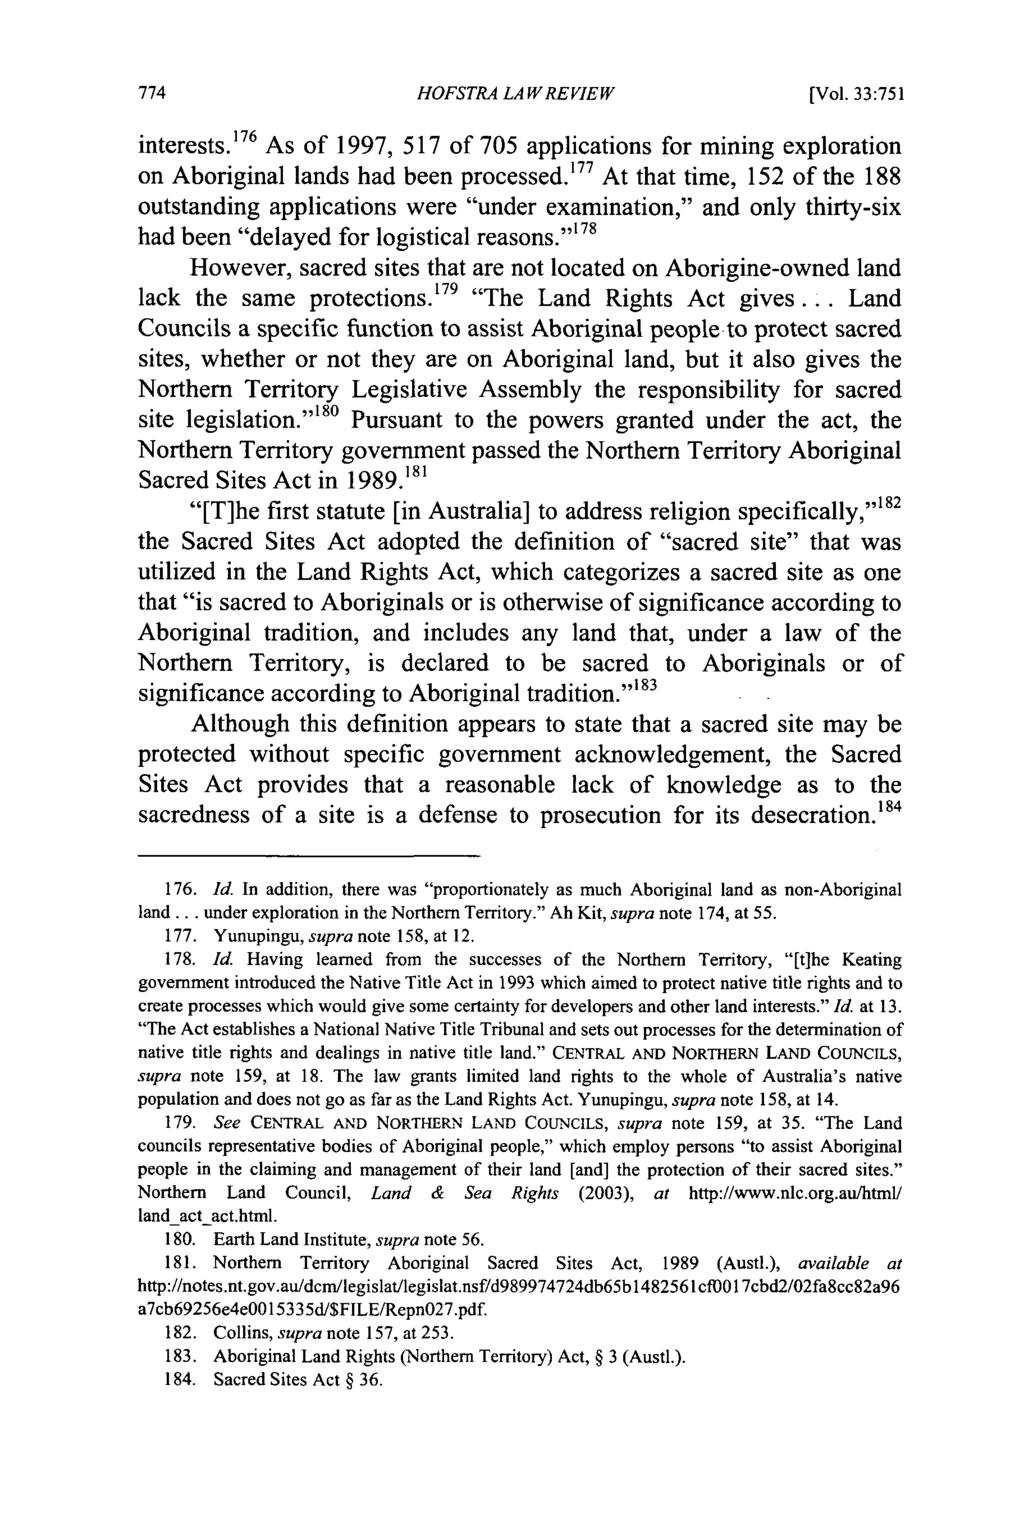 Hofstra Law Review, Vol. 33, Iss. 2 [2004], Art. 9 HOFSTRA LAW REVIEW [Vol. 33:751 interests. 176 As of 1997, 517 of 705 applications for mining exploration on Aboriginal lands had been processed.